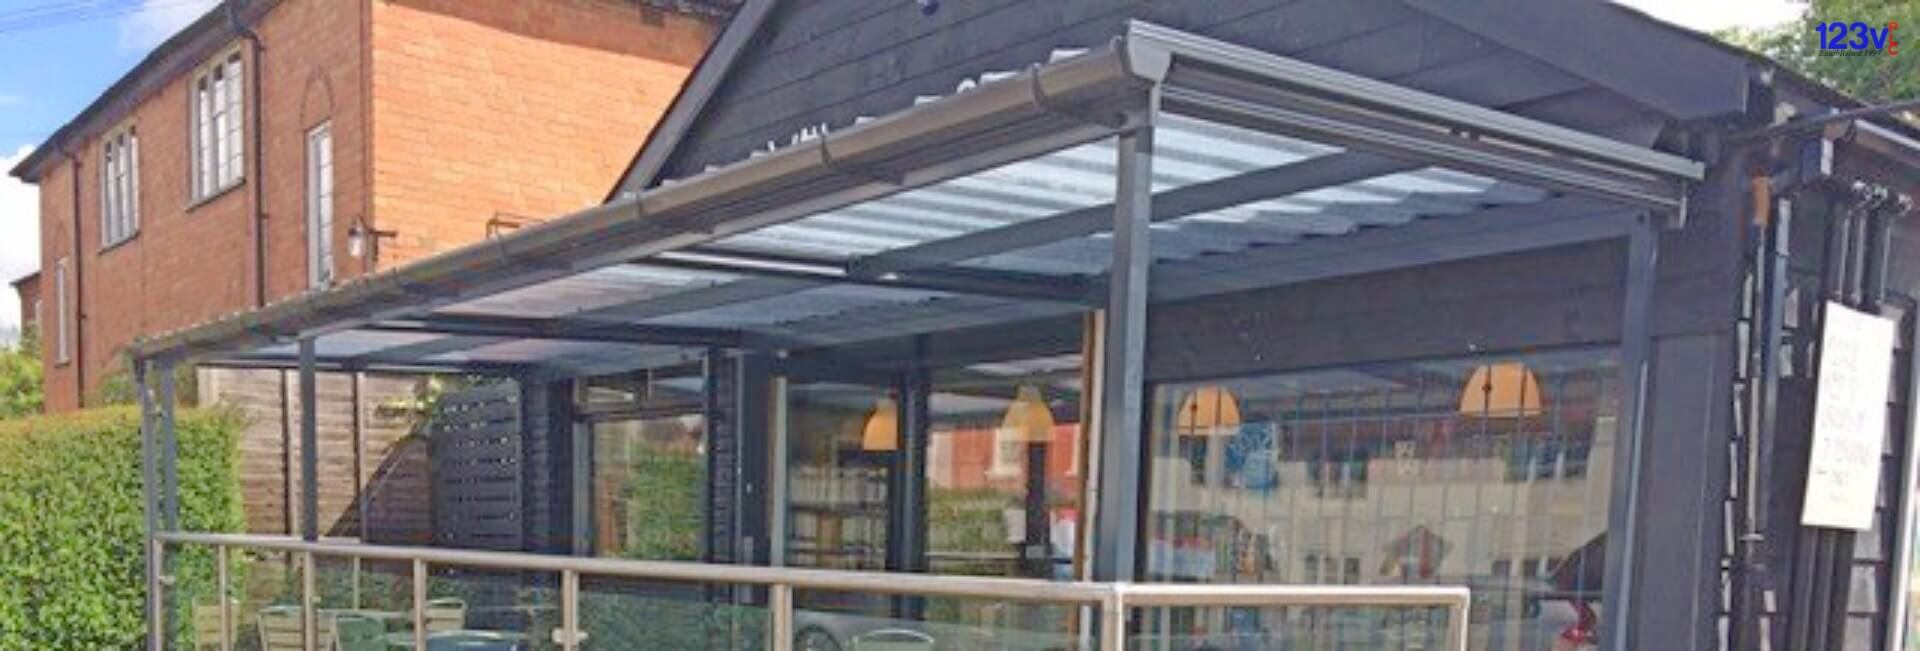 123v Commercial Canopies Worcestershire